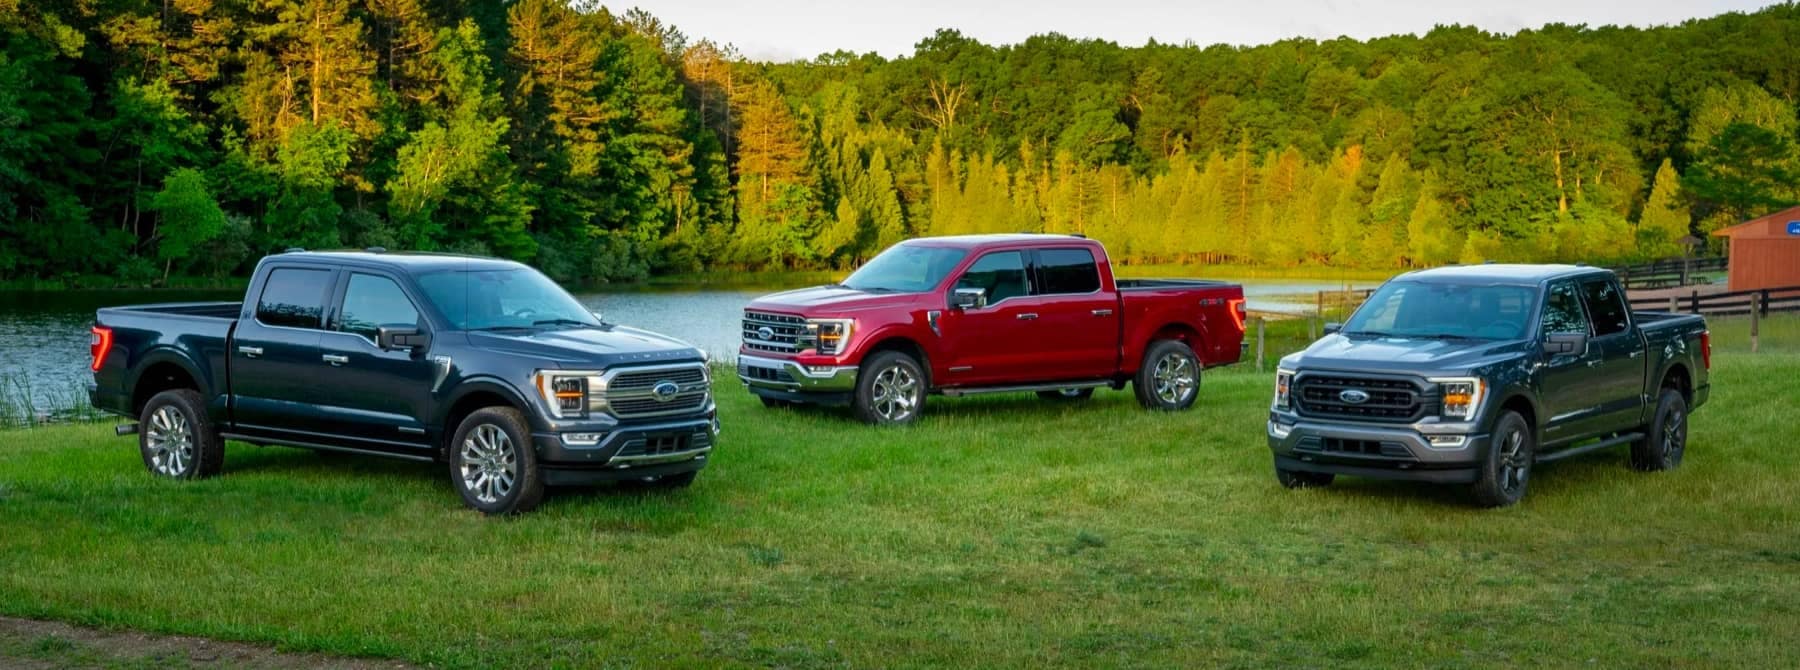 Three Ford trucks parked in a field in front of a lake